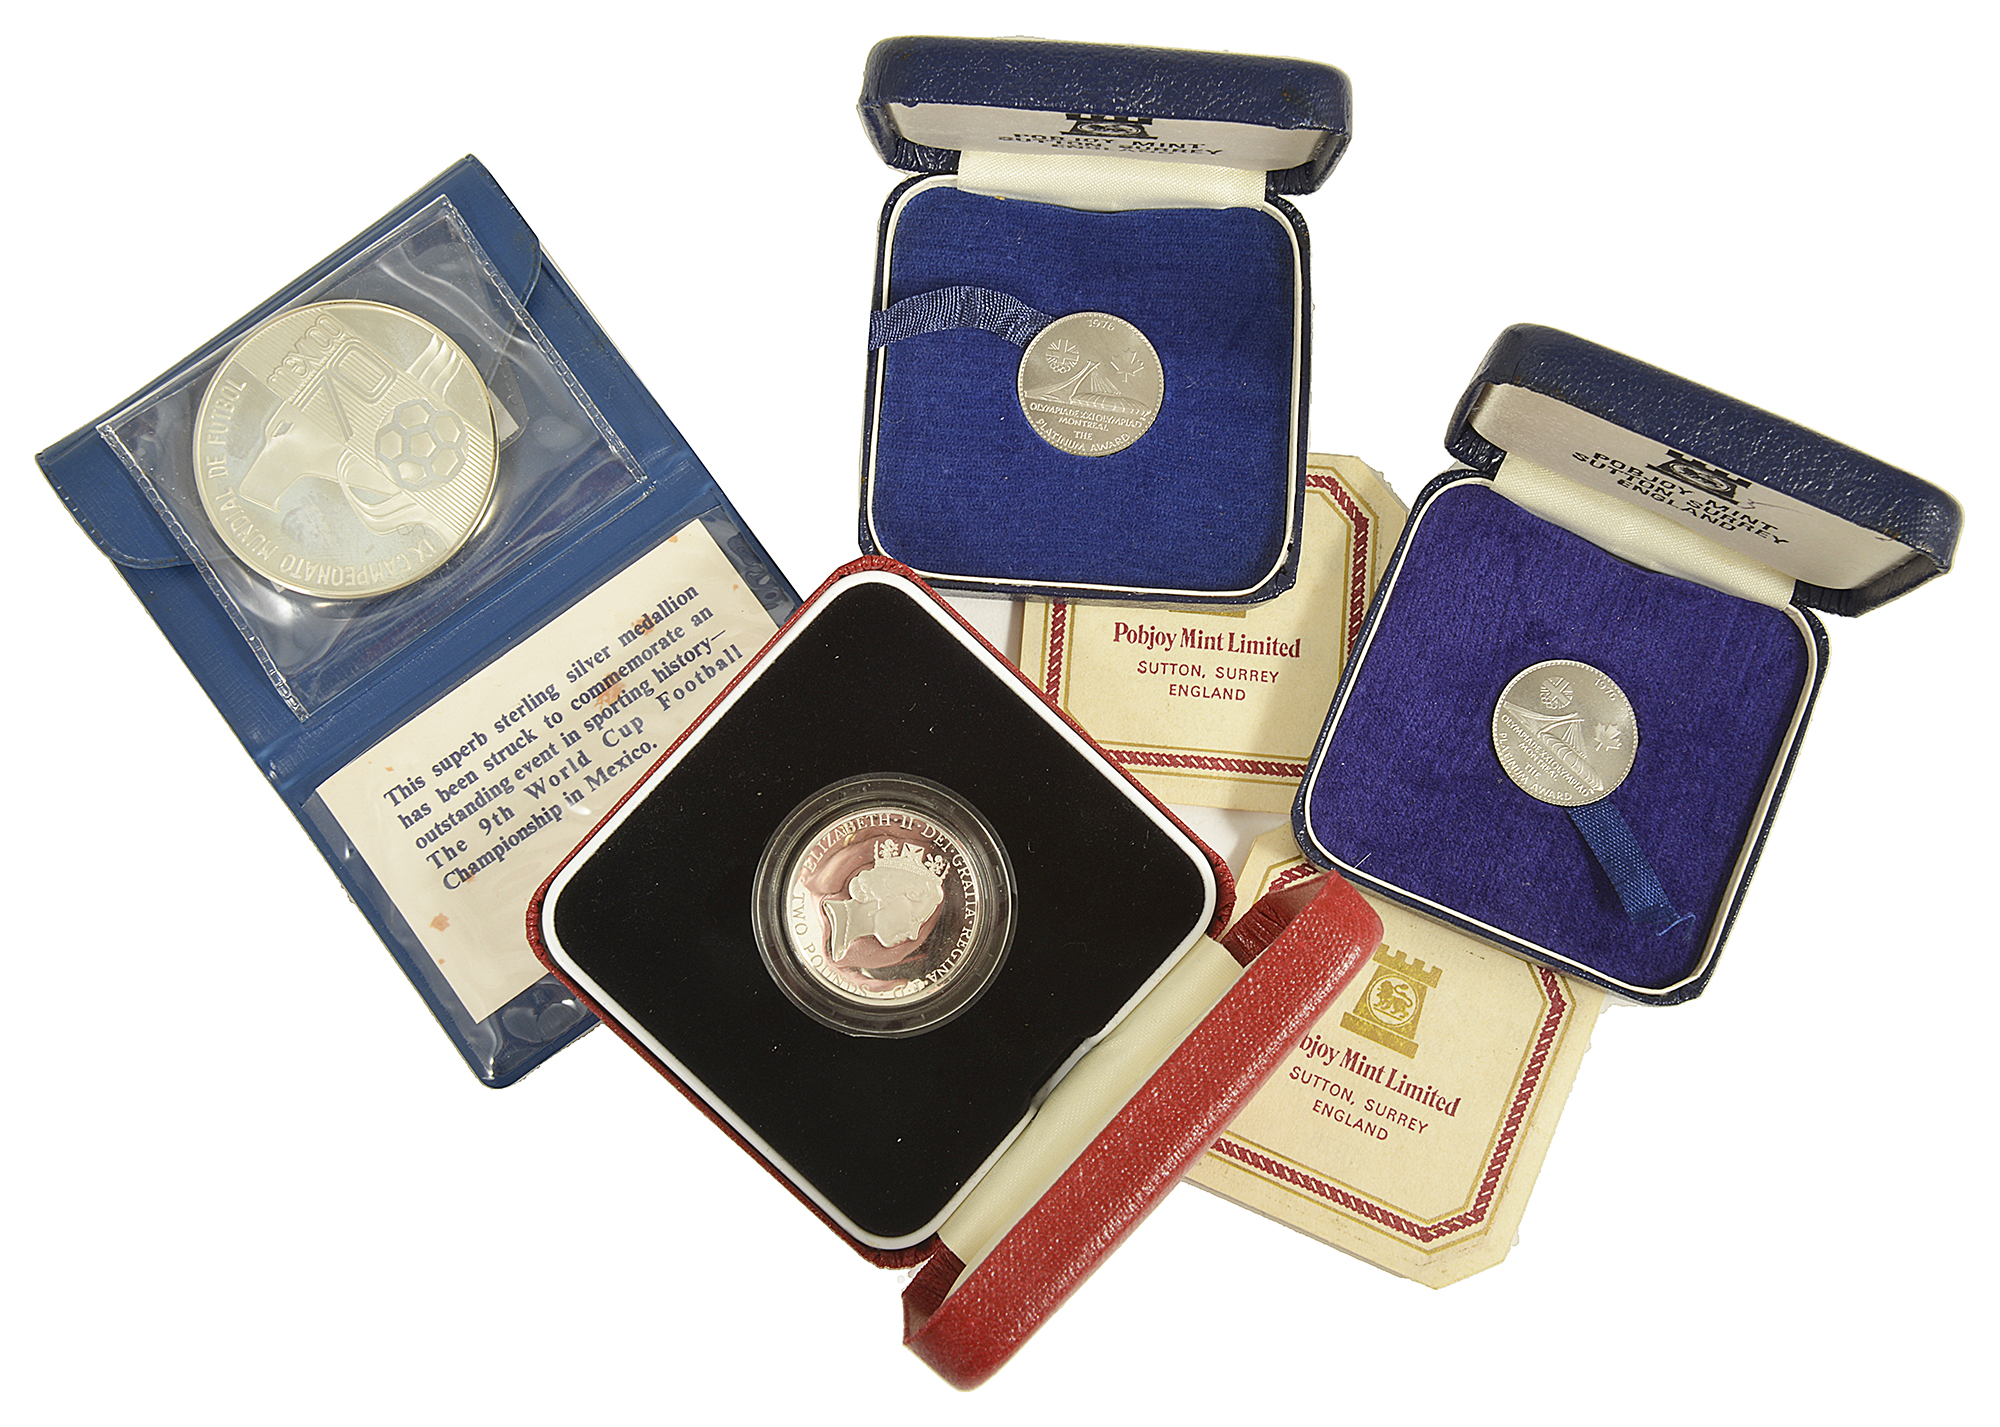 A selection of Sporting, USA and UK Commemorative coinage1 x 1996 UK silver proof œ2 coin 'A